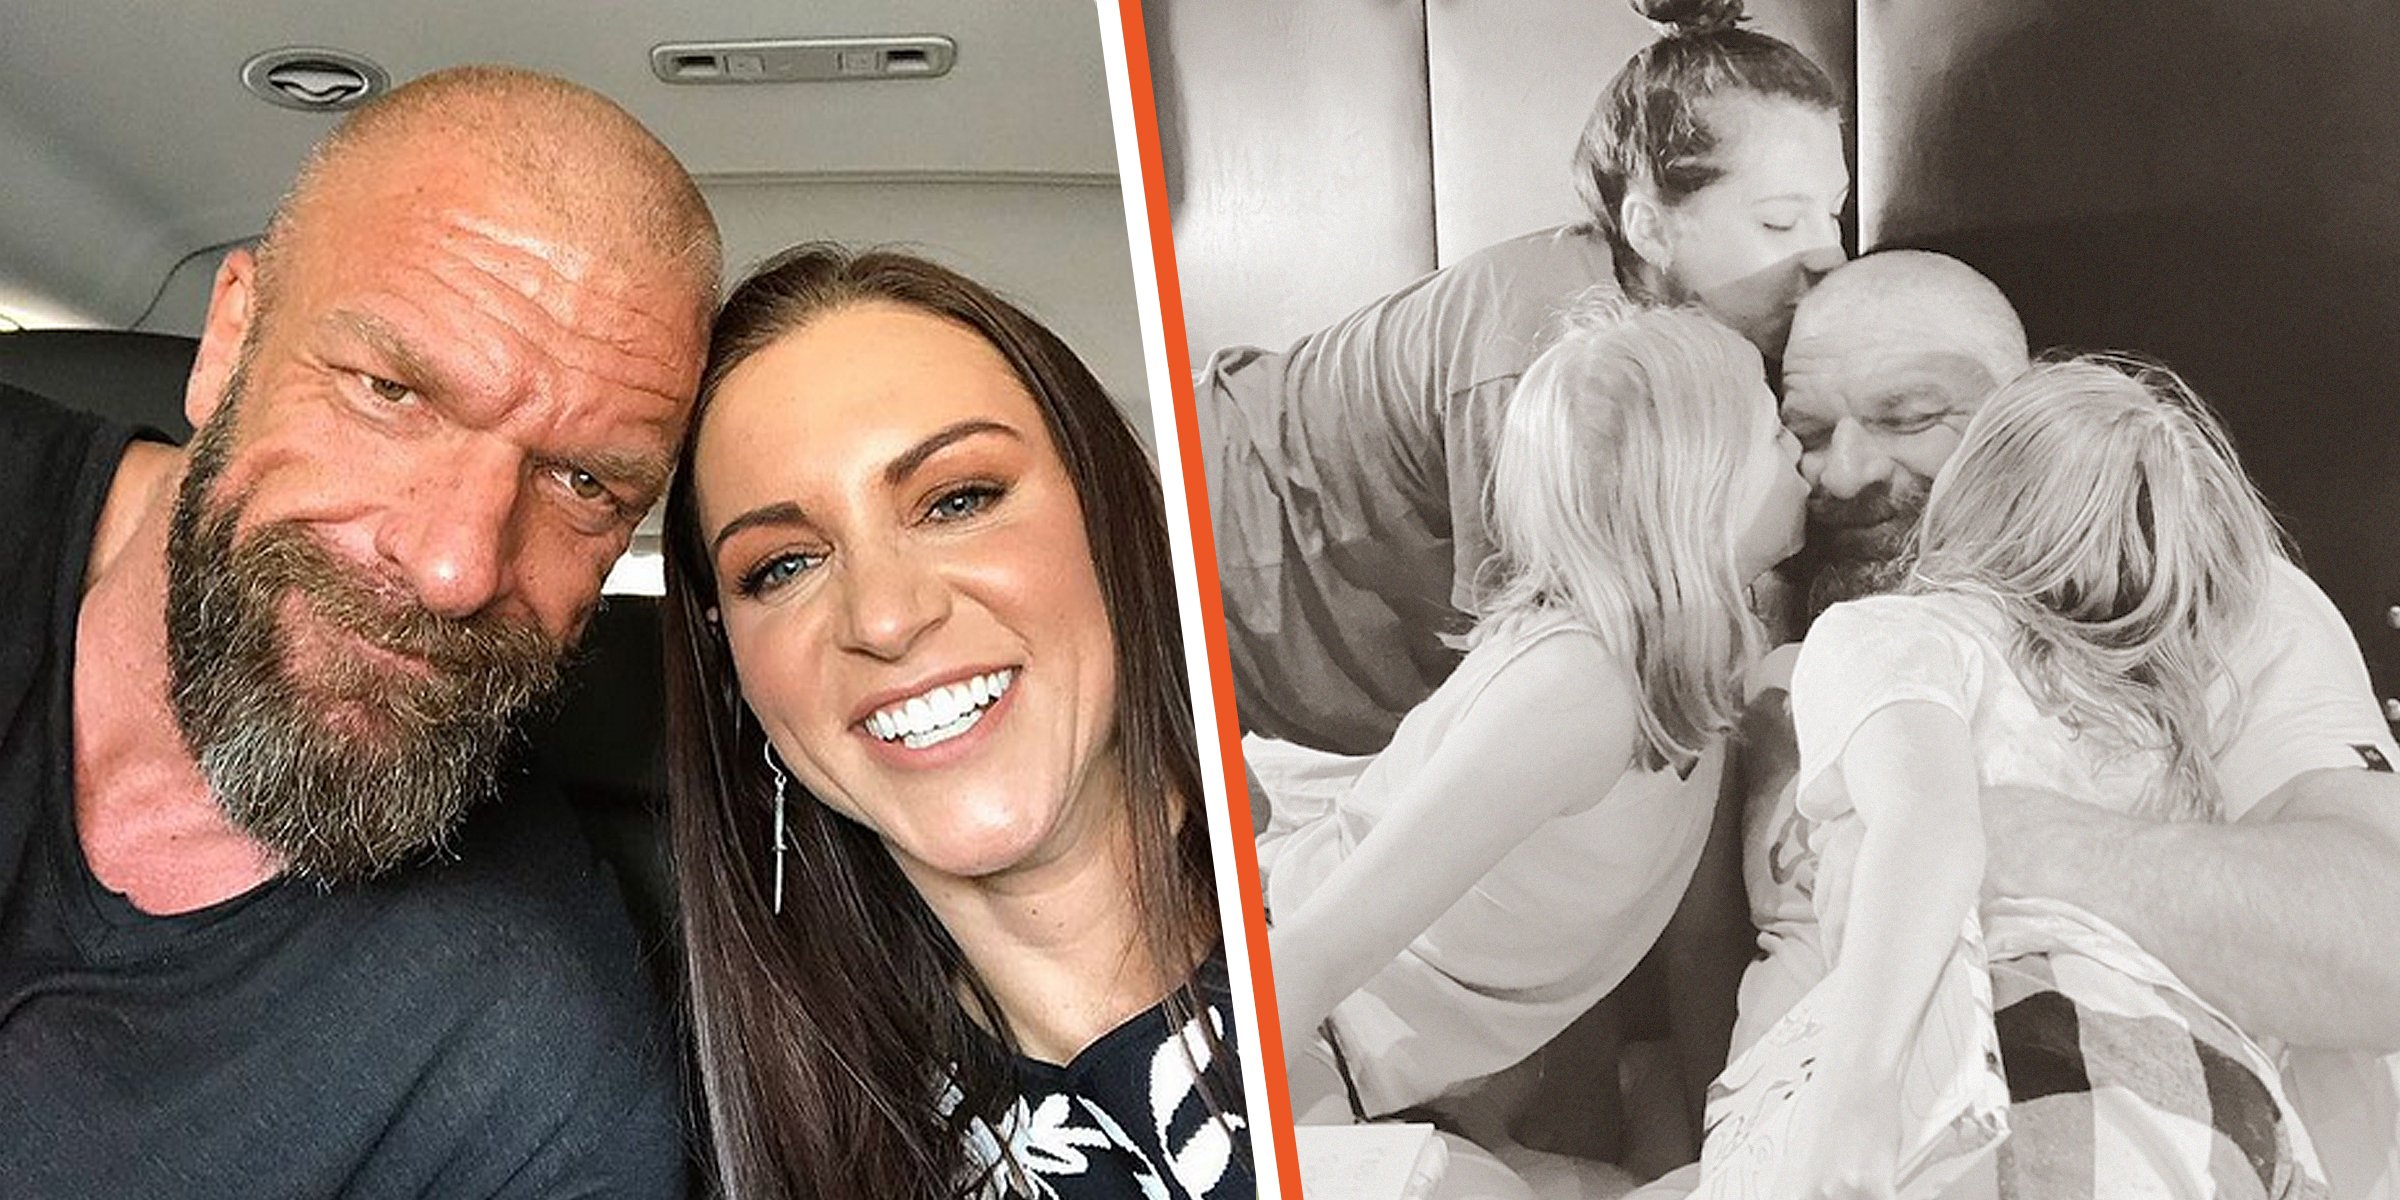 Triple H and Stephanie McMahon | Triple H, Aurora Rose Levesque, Murphy Claire Levesque, and Vaughn Evelyn Levesque | Source: Instagram.com/stephaniemcmahon